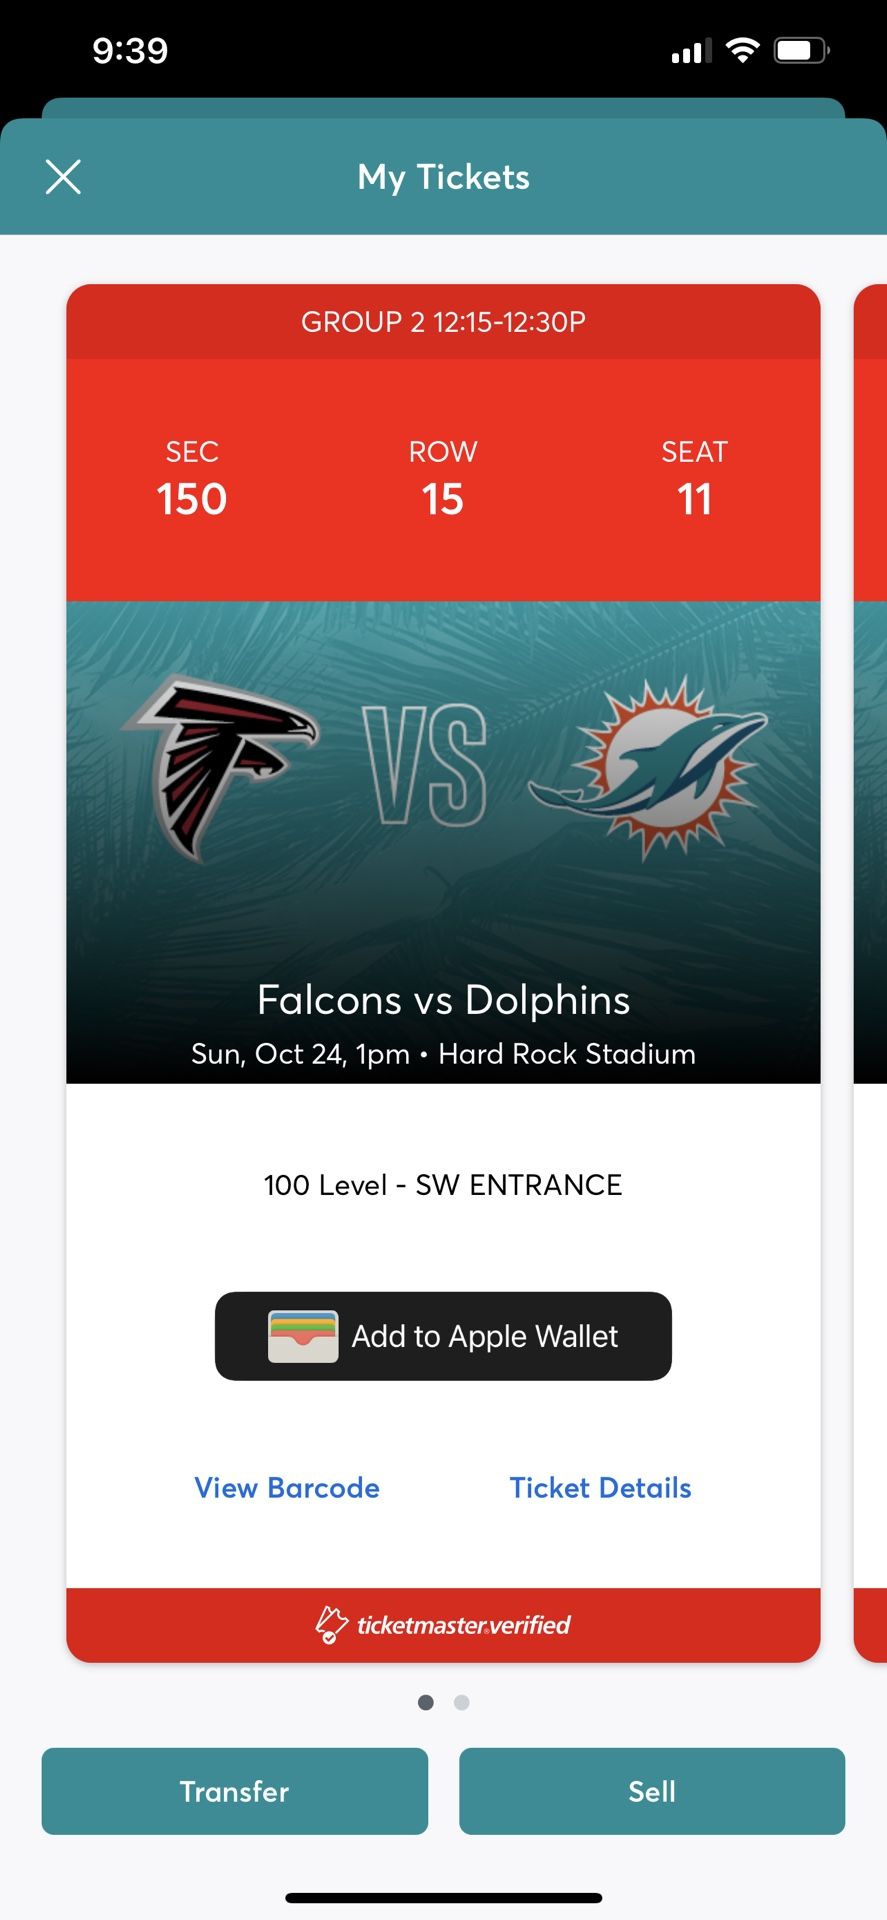 2 MIAMI DOLPHINS TICKETS PLUS PARKING PASS